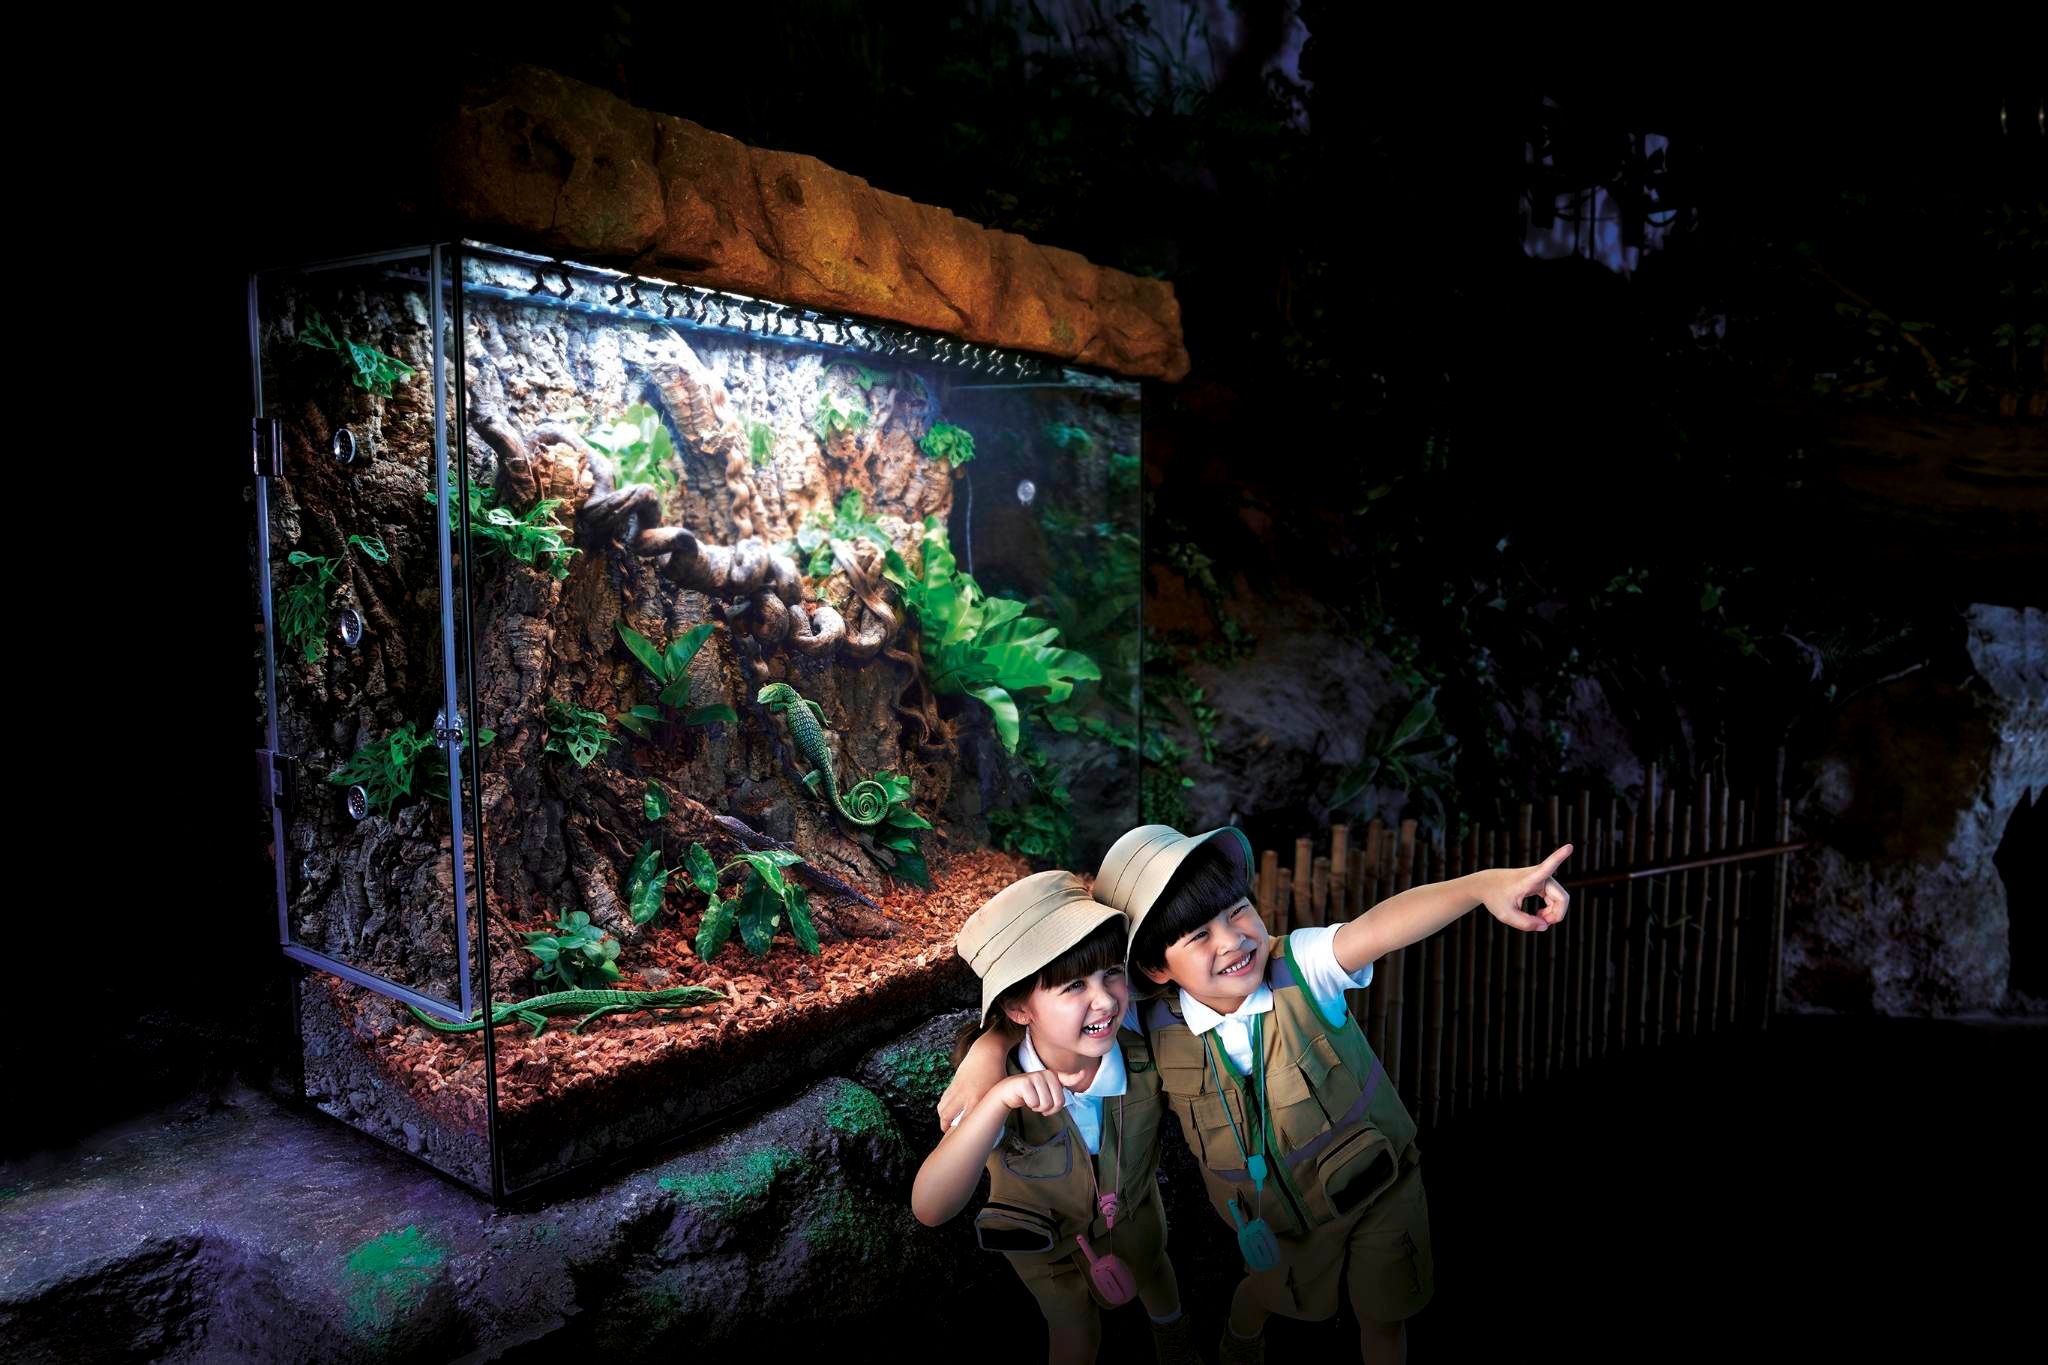 Two boys dressed in safari outfits standing in the lush and vibrant rainforest environment at SEA LIFE Bangkok Ocean World, with diverse plant life and habitat for various creatures.